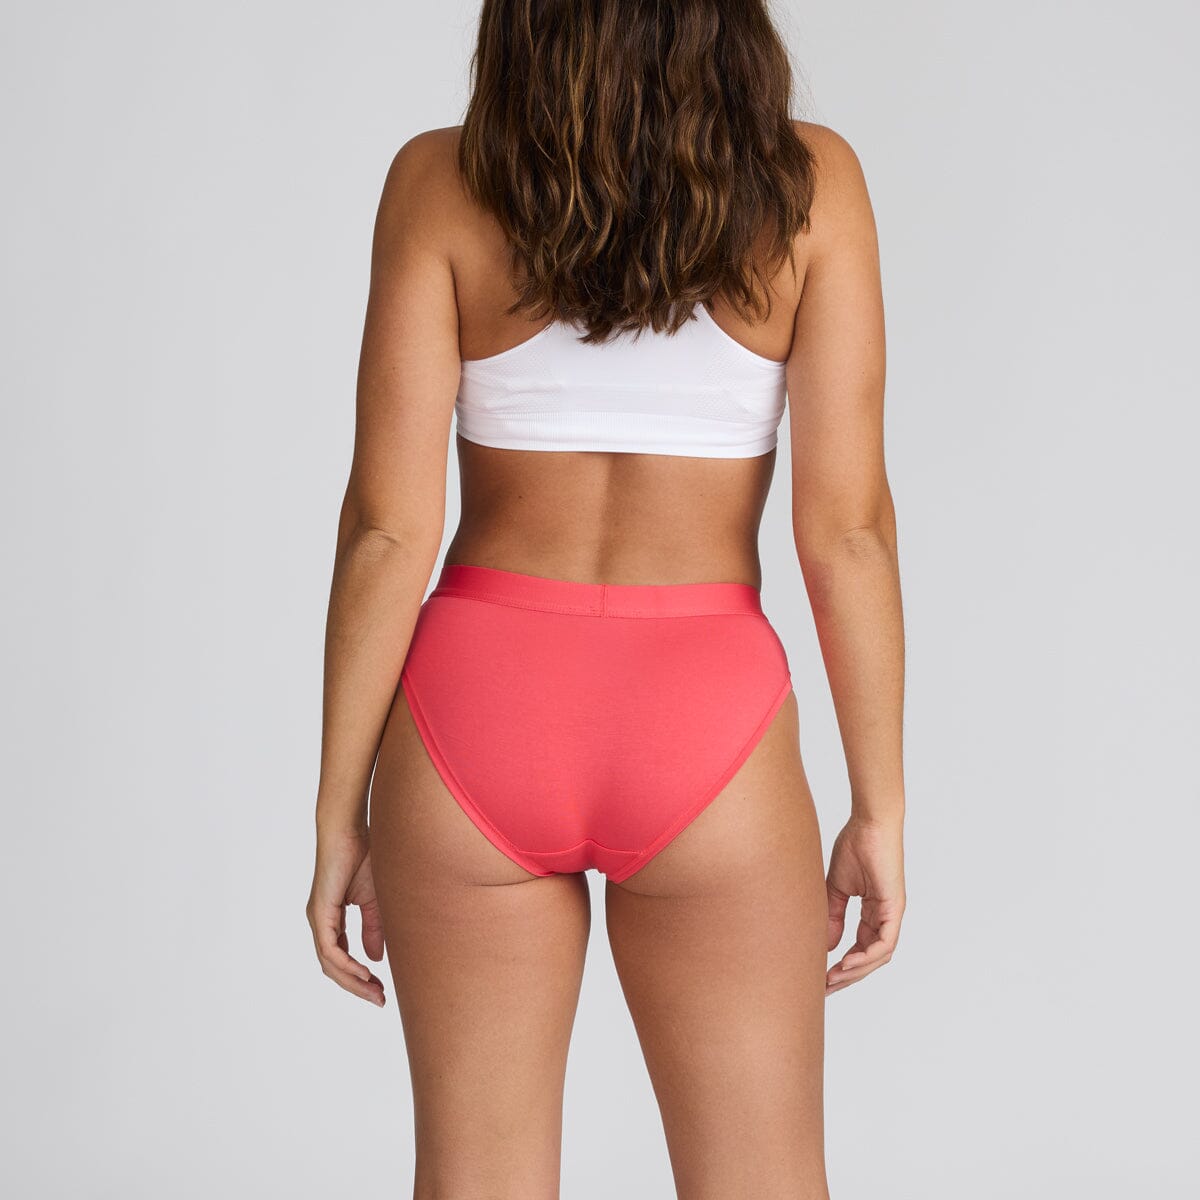 Red Women's Bamboo Underwear at Step One